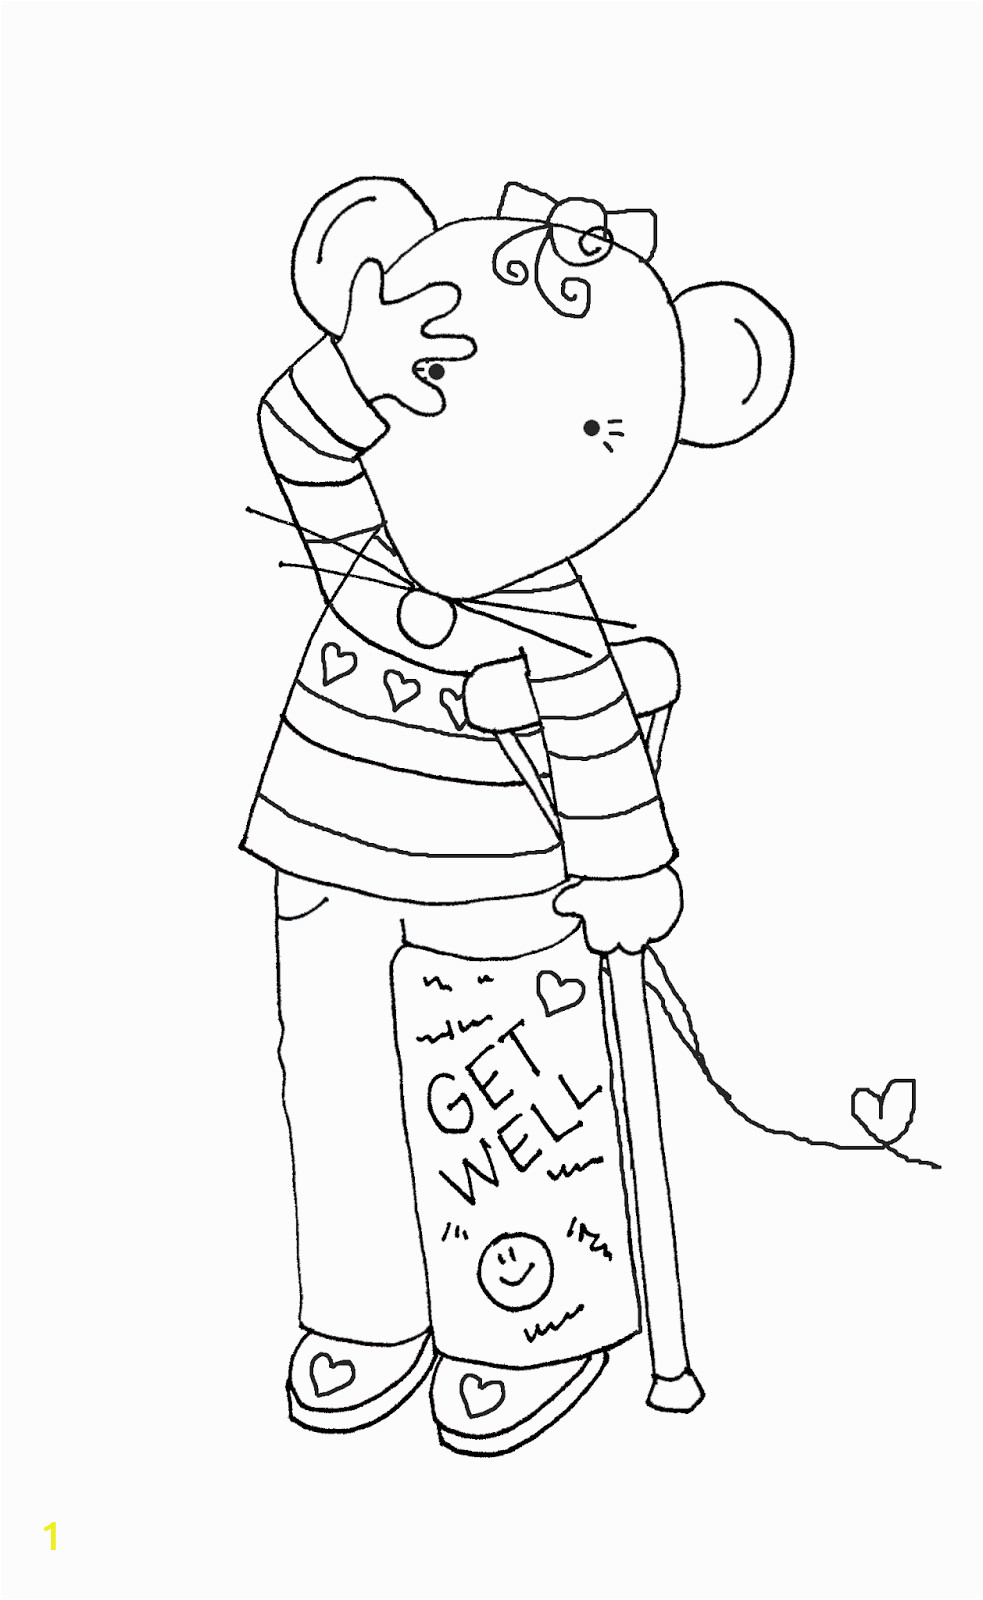 Disney Get Well soon Coloring Pages as Requested Oken Leg Mousie Girl and One More